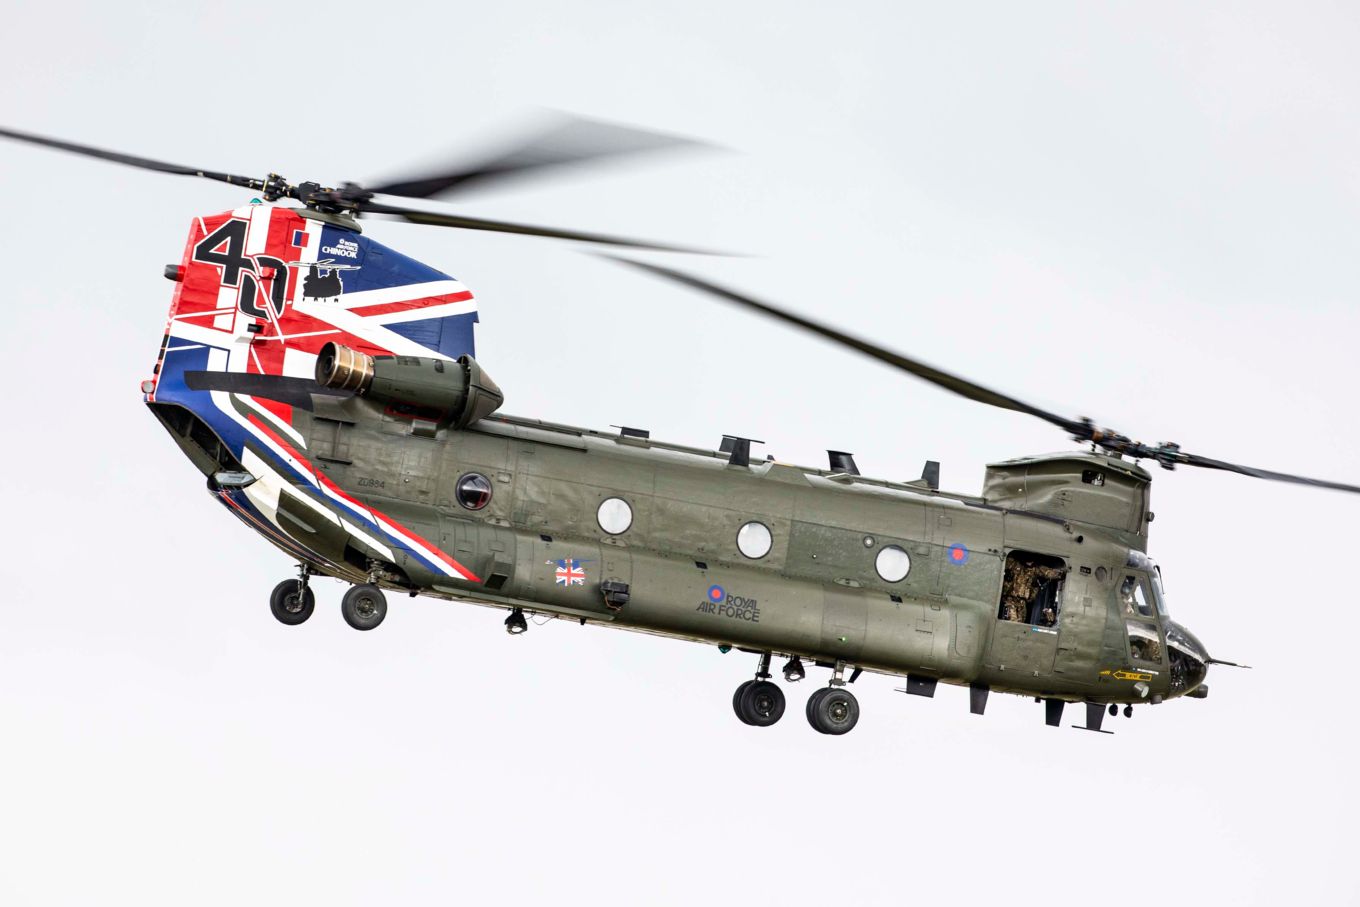 RAF Chinhook flying displaying the new colour scheme